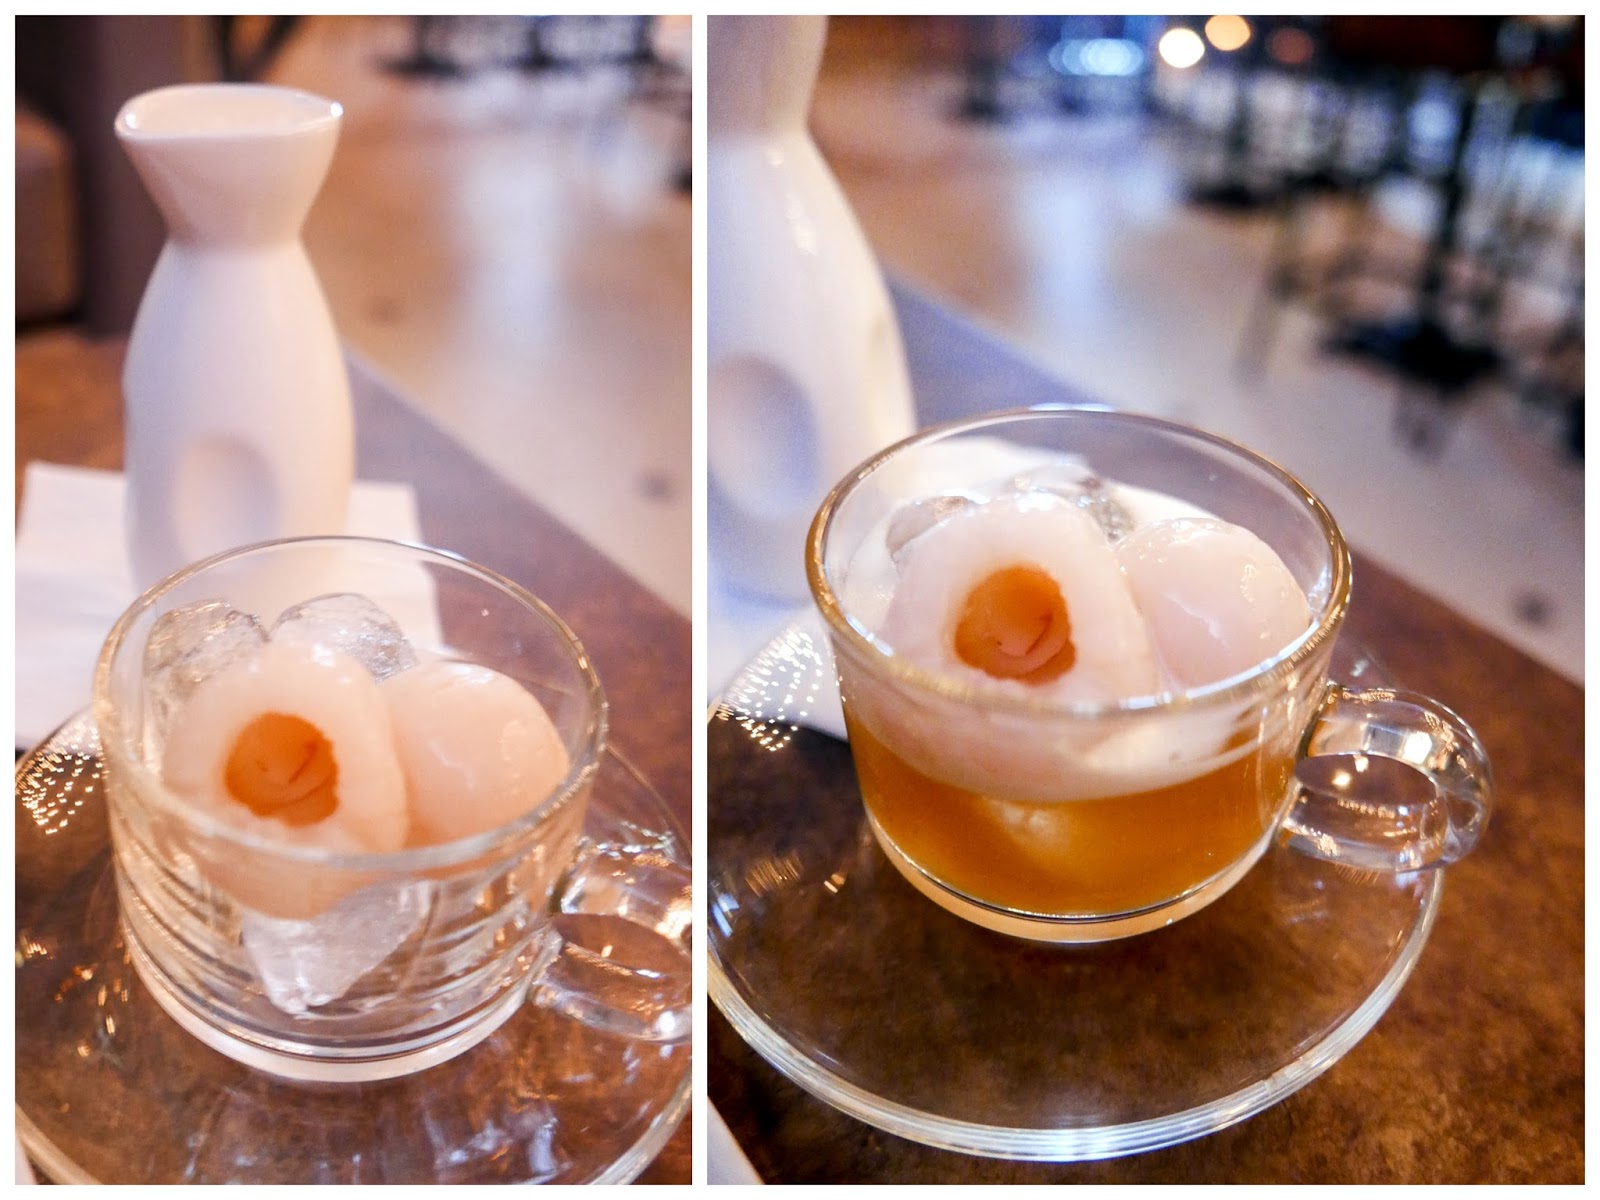 4. Vodka infused with Tie Guan Yin Chinese oolong tea, poured over with sake & rounded out with whole lychees